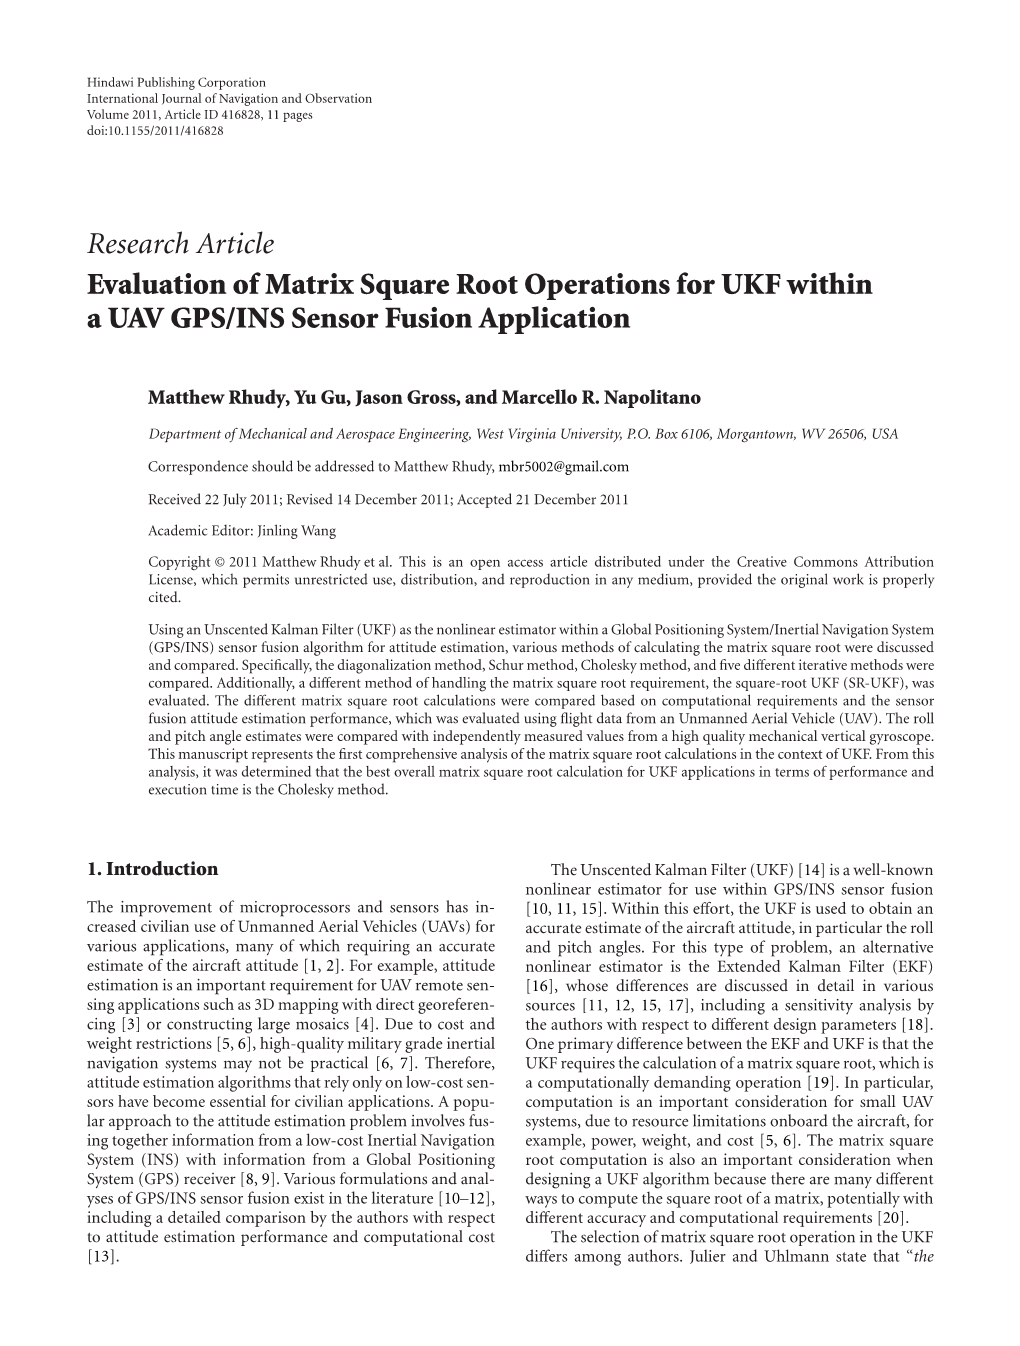 Research Article Evaluation of Matrix Square Root Operations for UKF Within a UAV GPS/INS Sensor Fusion Application